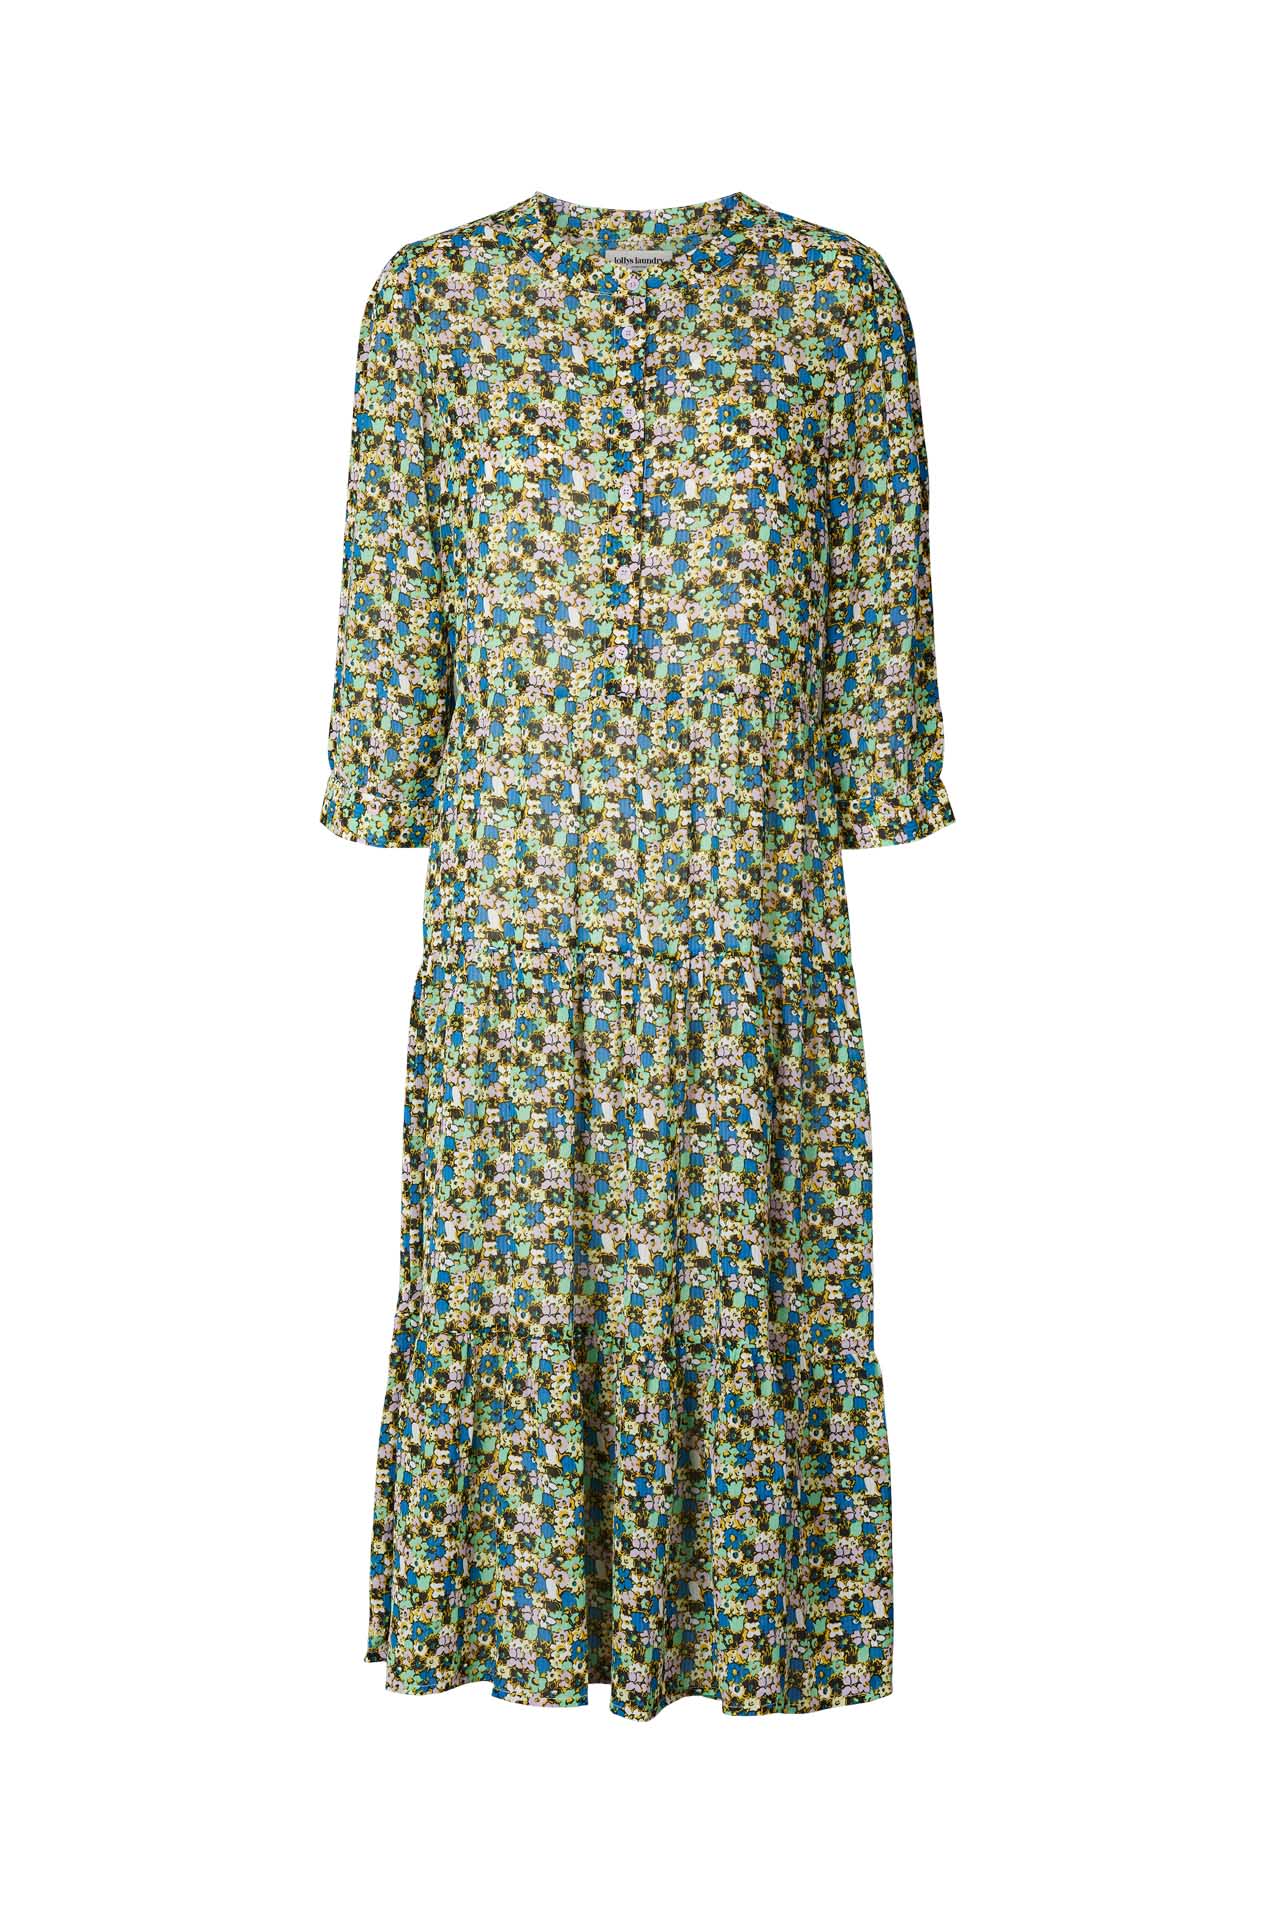 Lollys Laundry Olivia Green Floral Dress